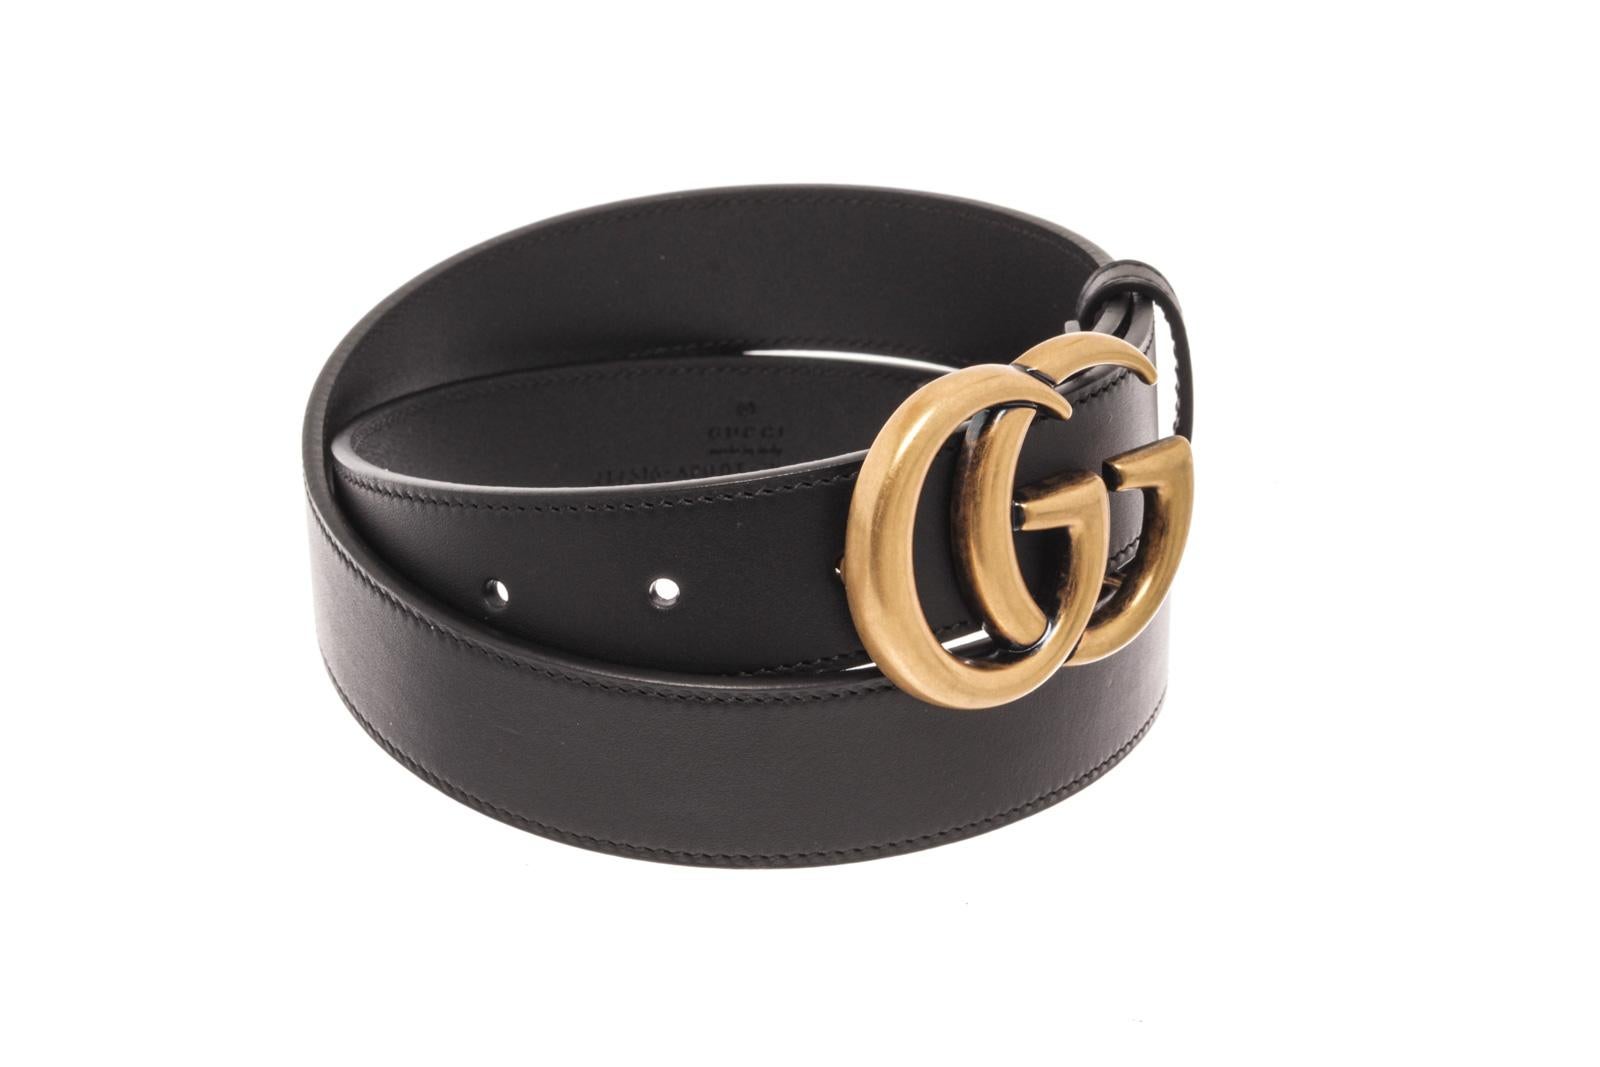 Gucci GG Black Leather GHW Thin Belt 75 with this stylish belt is made of black calfskin leather and features an interlocking gg buckle in antique brass.

76005MSC